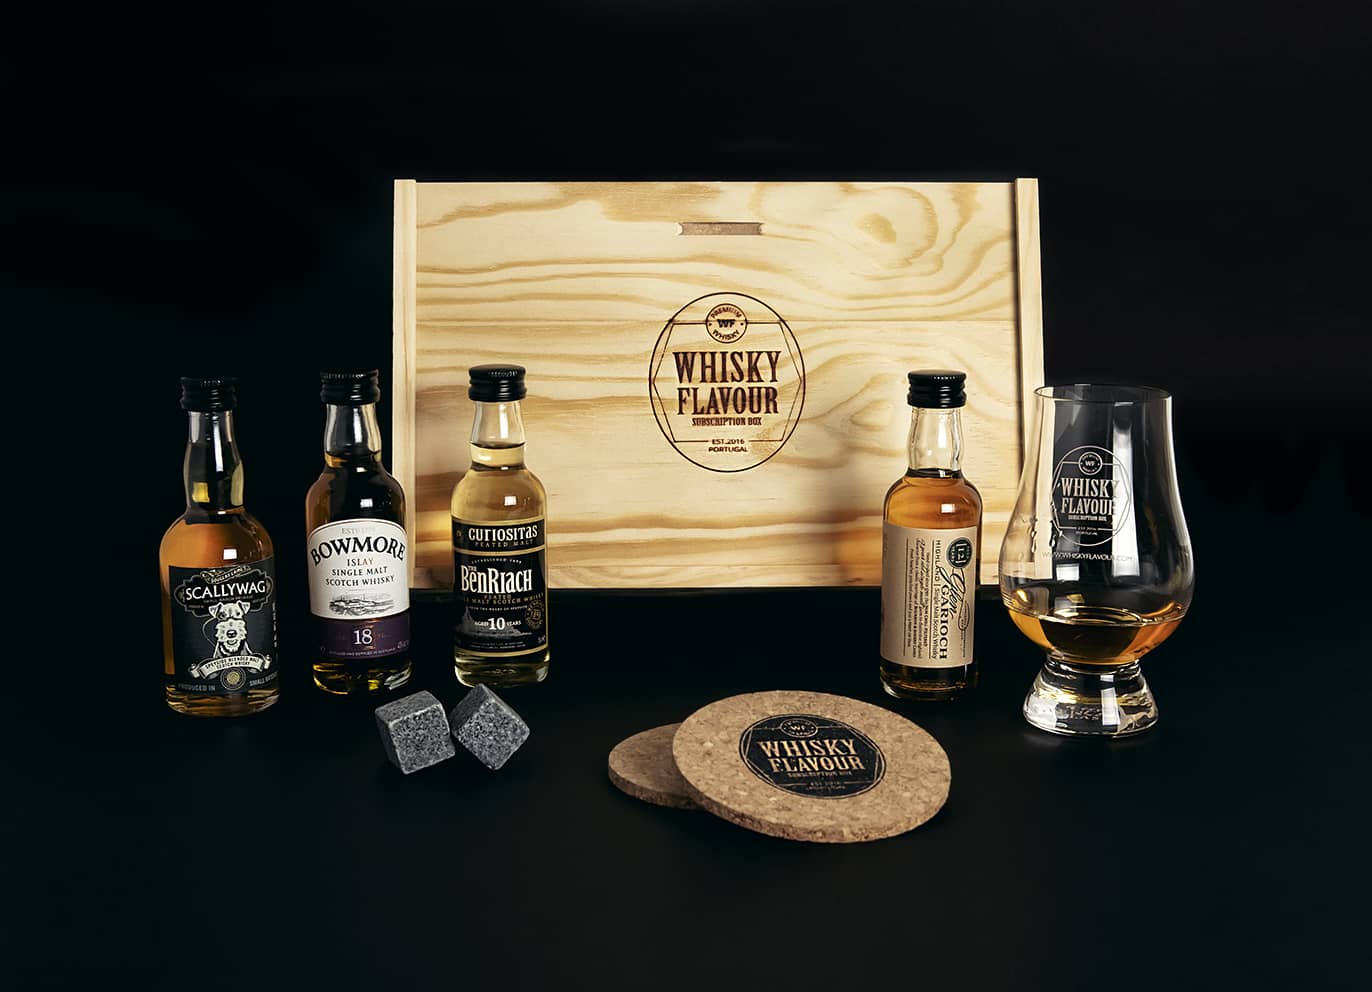 whisky box whisky tastings that comes to you